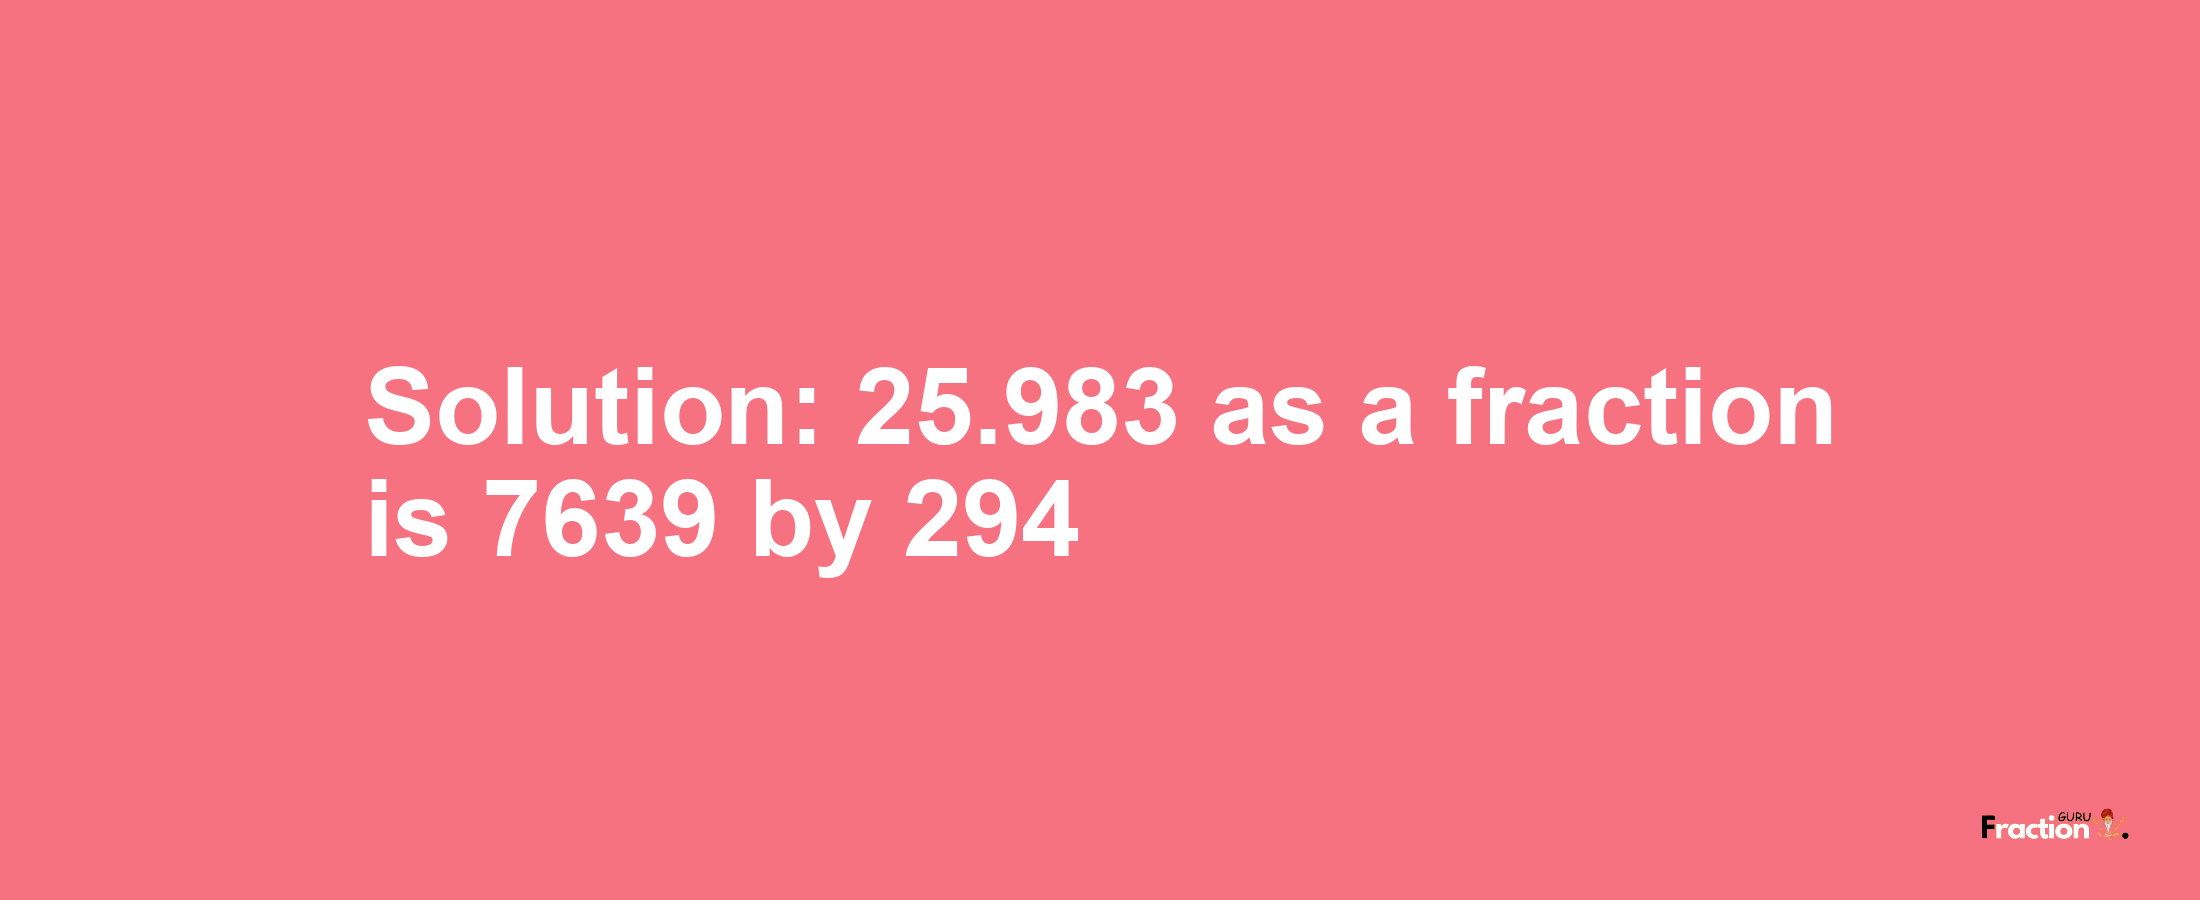 Solution:25.983 as a fraction is 7639/294